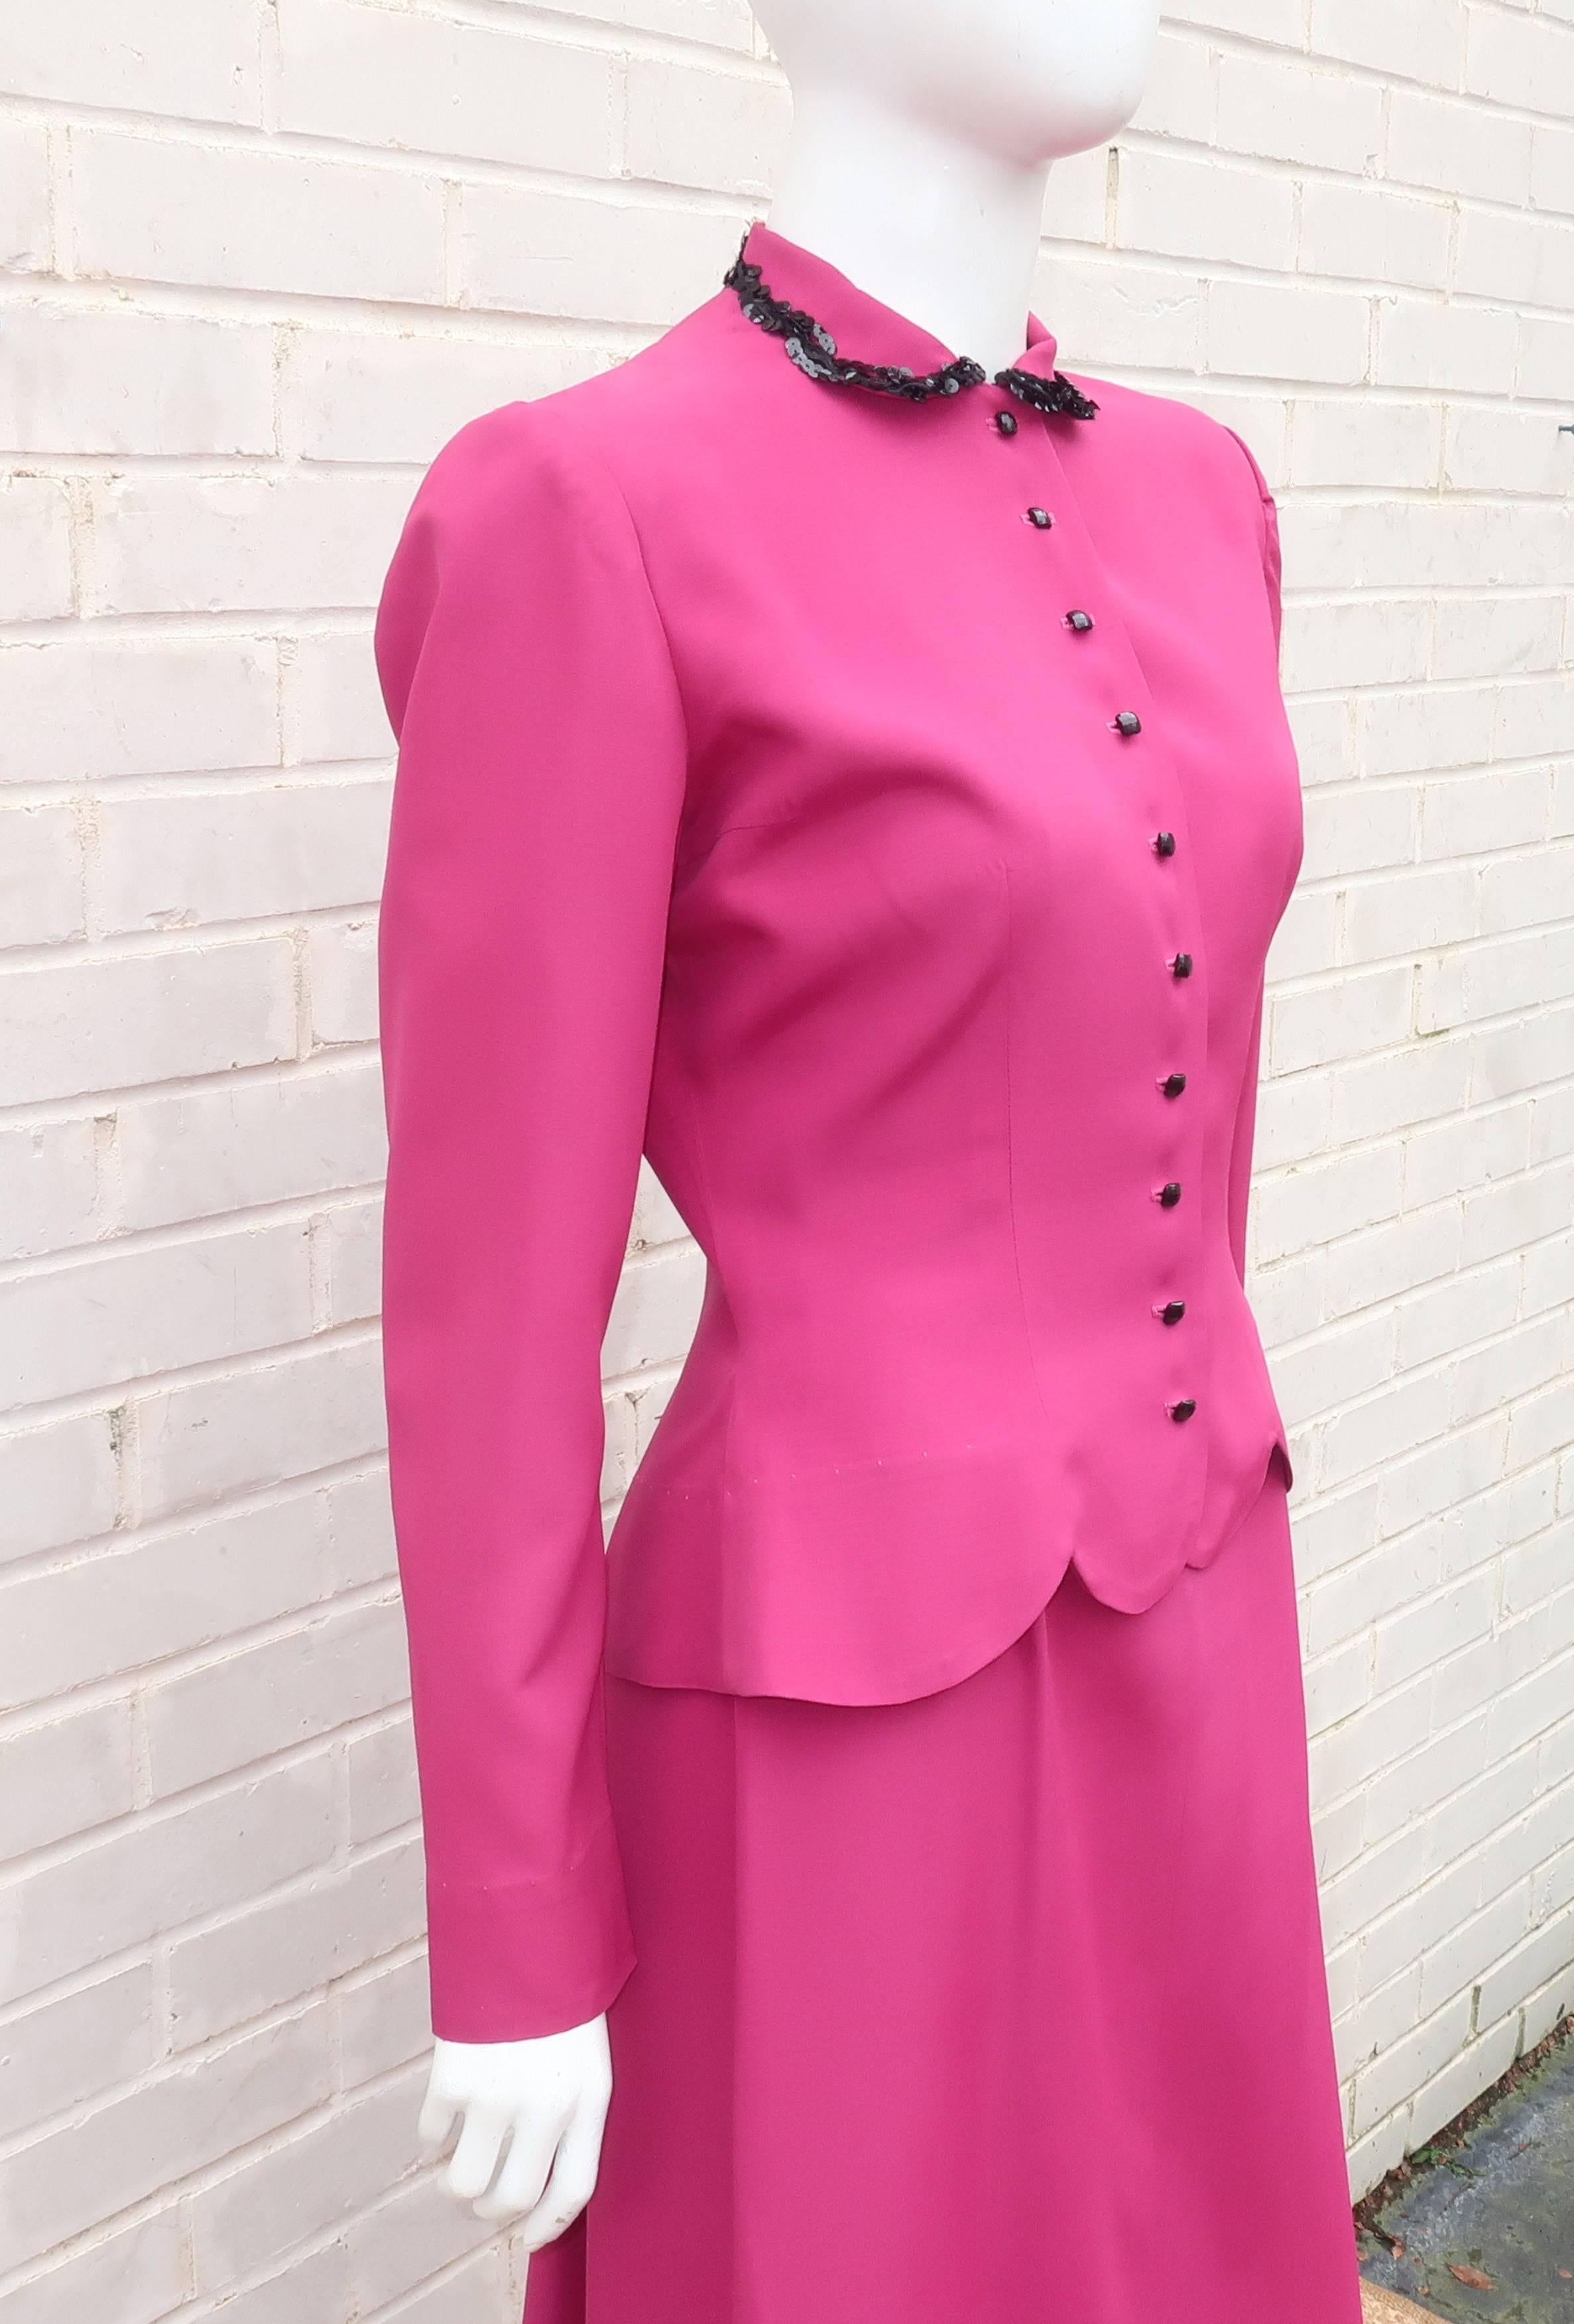 The Jonathan Logan clothing company catered to the ‘young cosmopolitan’ ... always pretty and classy without being trendy.  This early 1950’s magenta faille skirt suit features a sweet peplum jacket with a black sequin embellished peter pan collar,